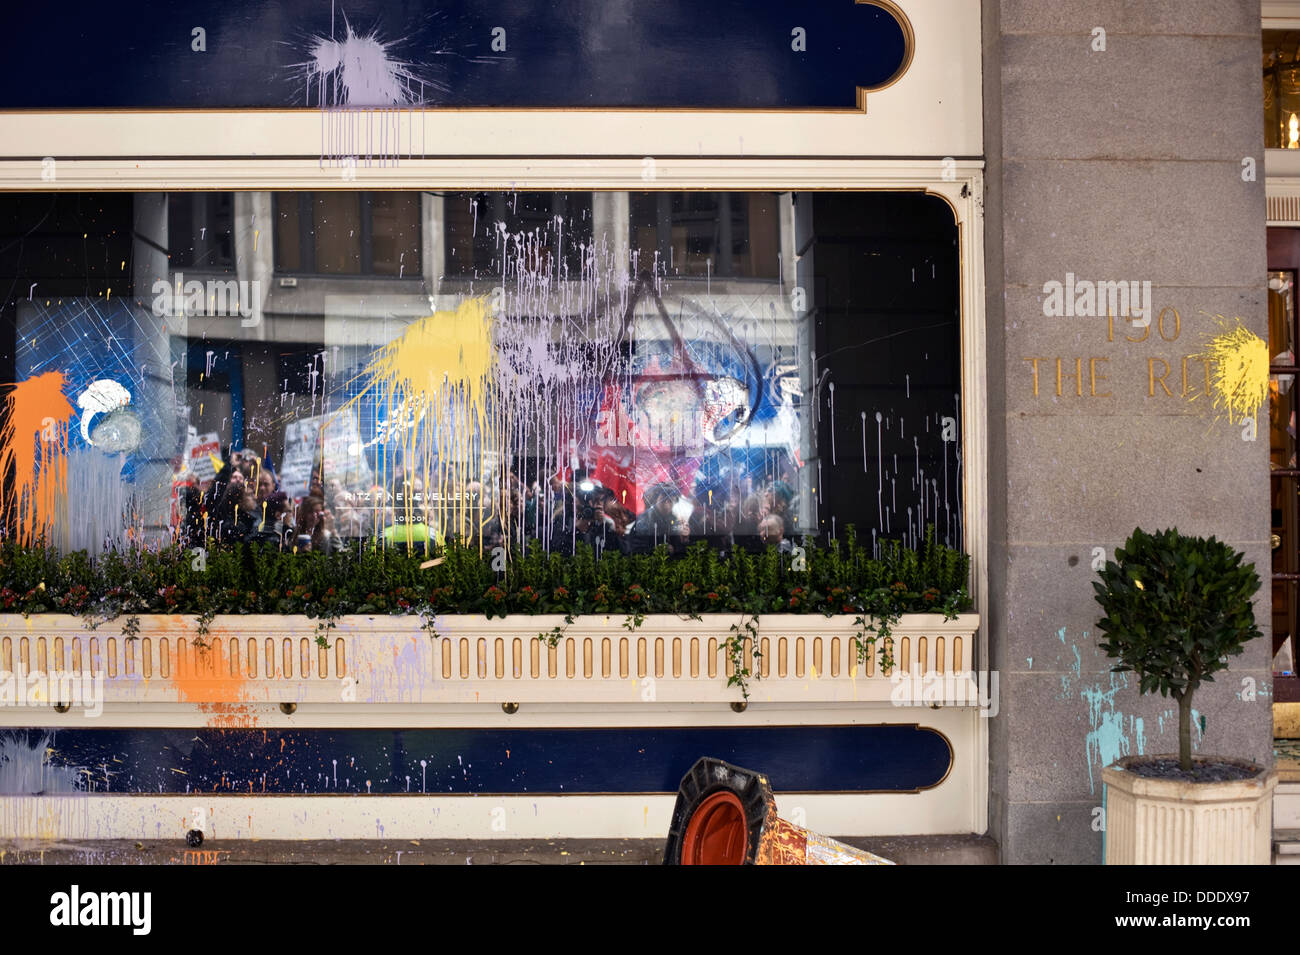 London, England, March 26, 2011. The Ritz hotel after an anarchist paint bomb attack during a protest march. Stock Photo